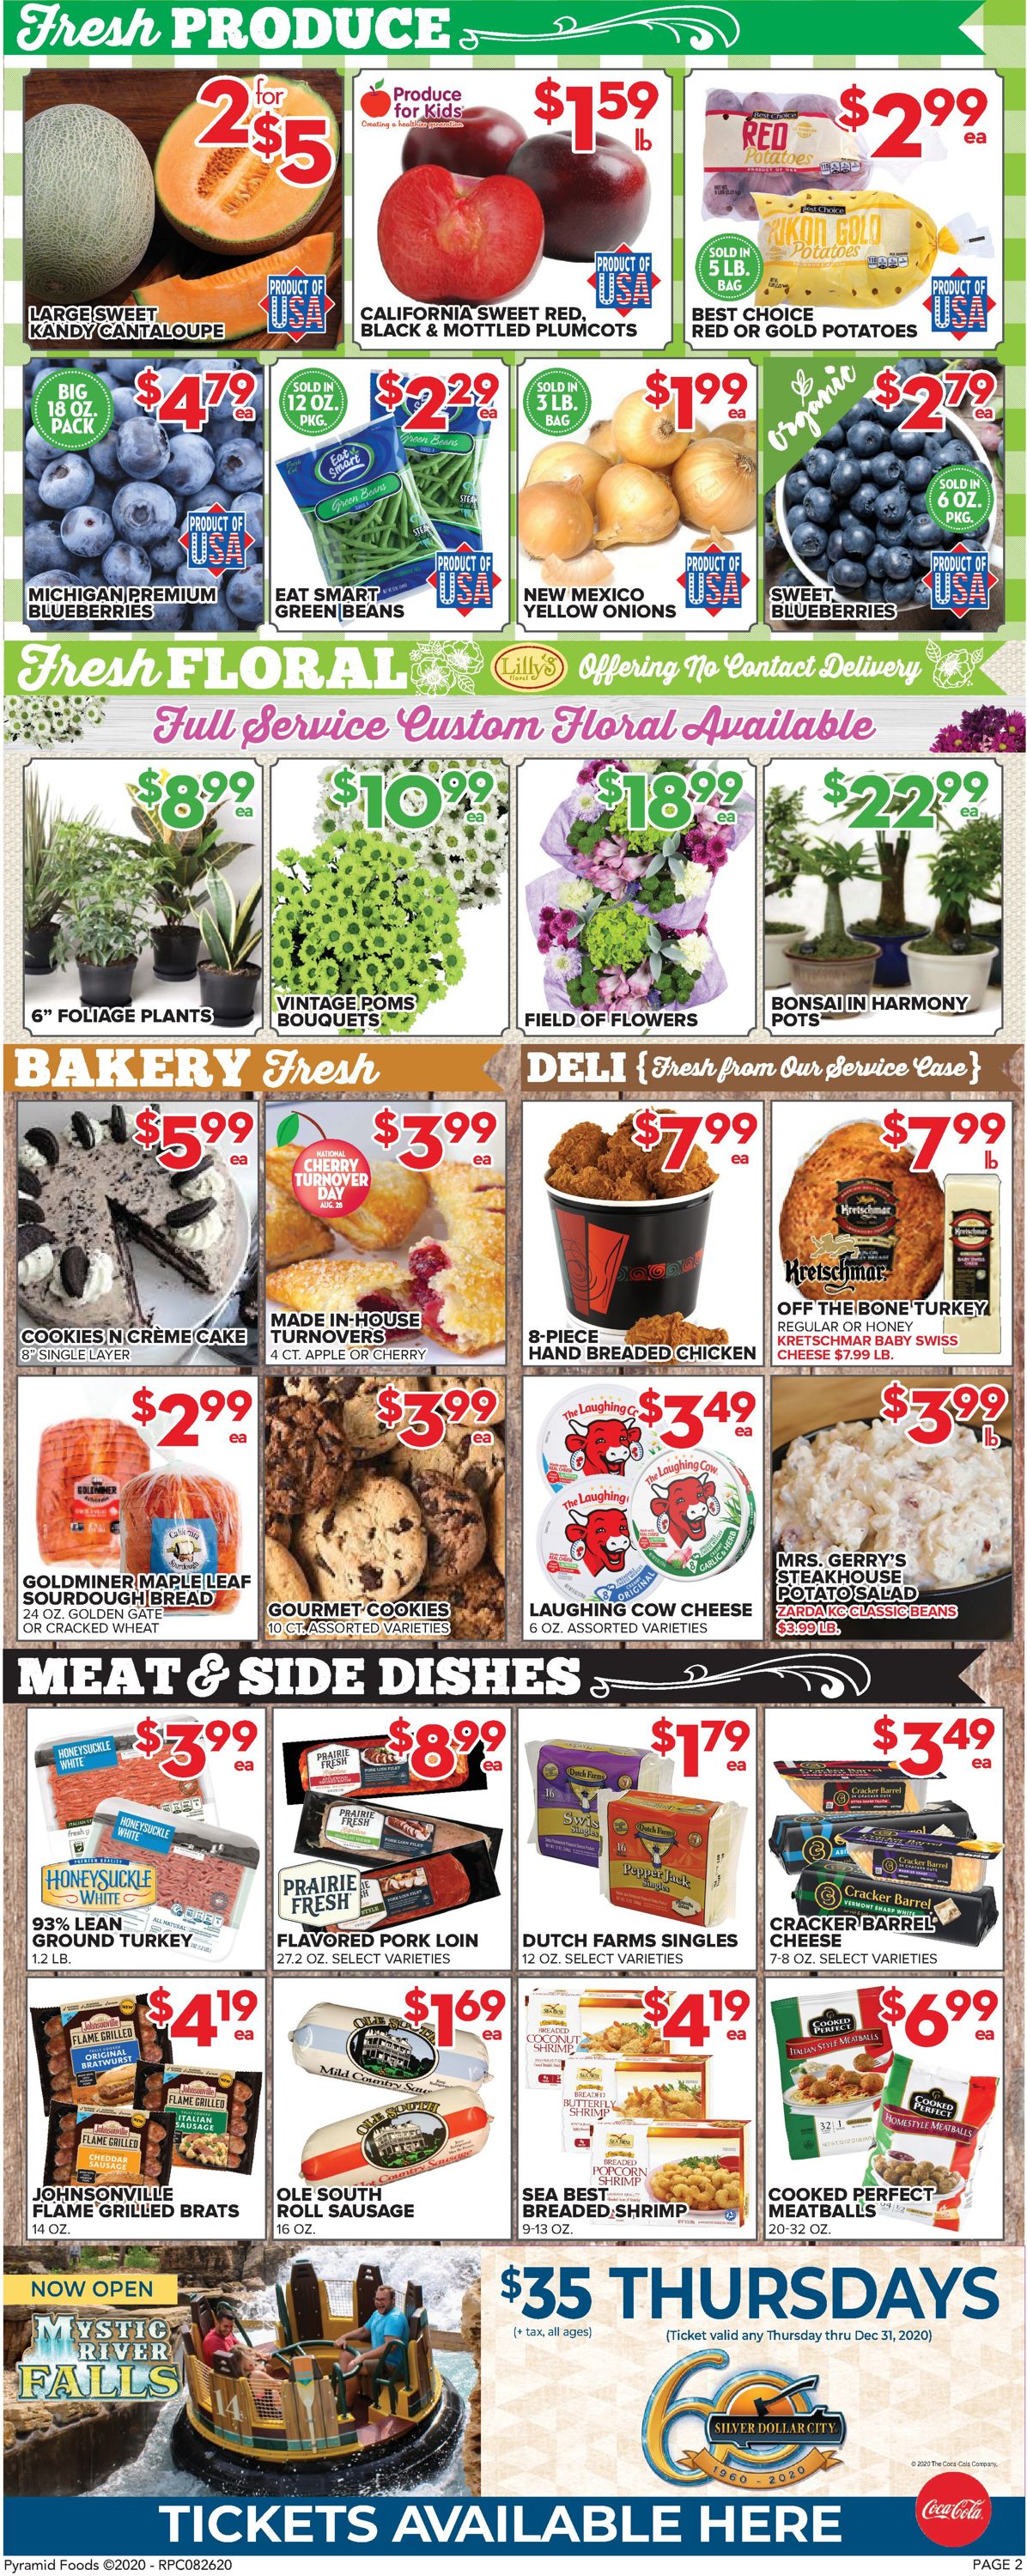 Price Cutter Weekly Ad Circular - valid 08/26-09/01/2020 (Page 2)